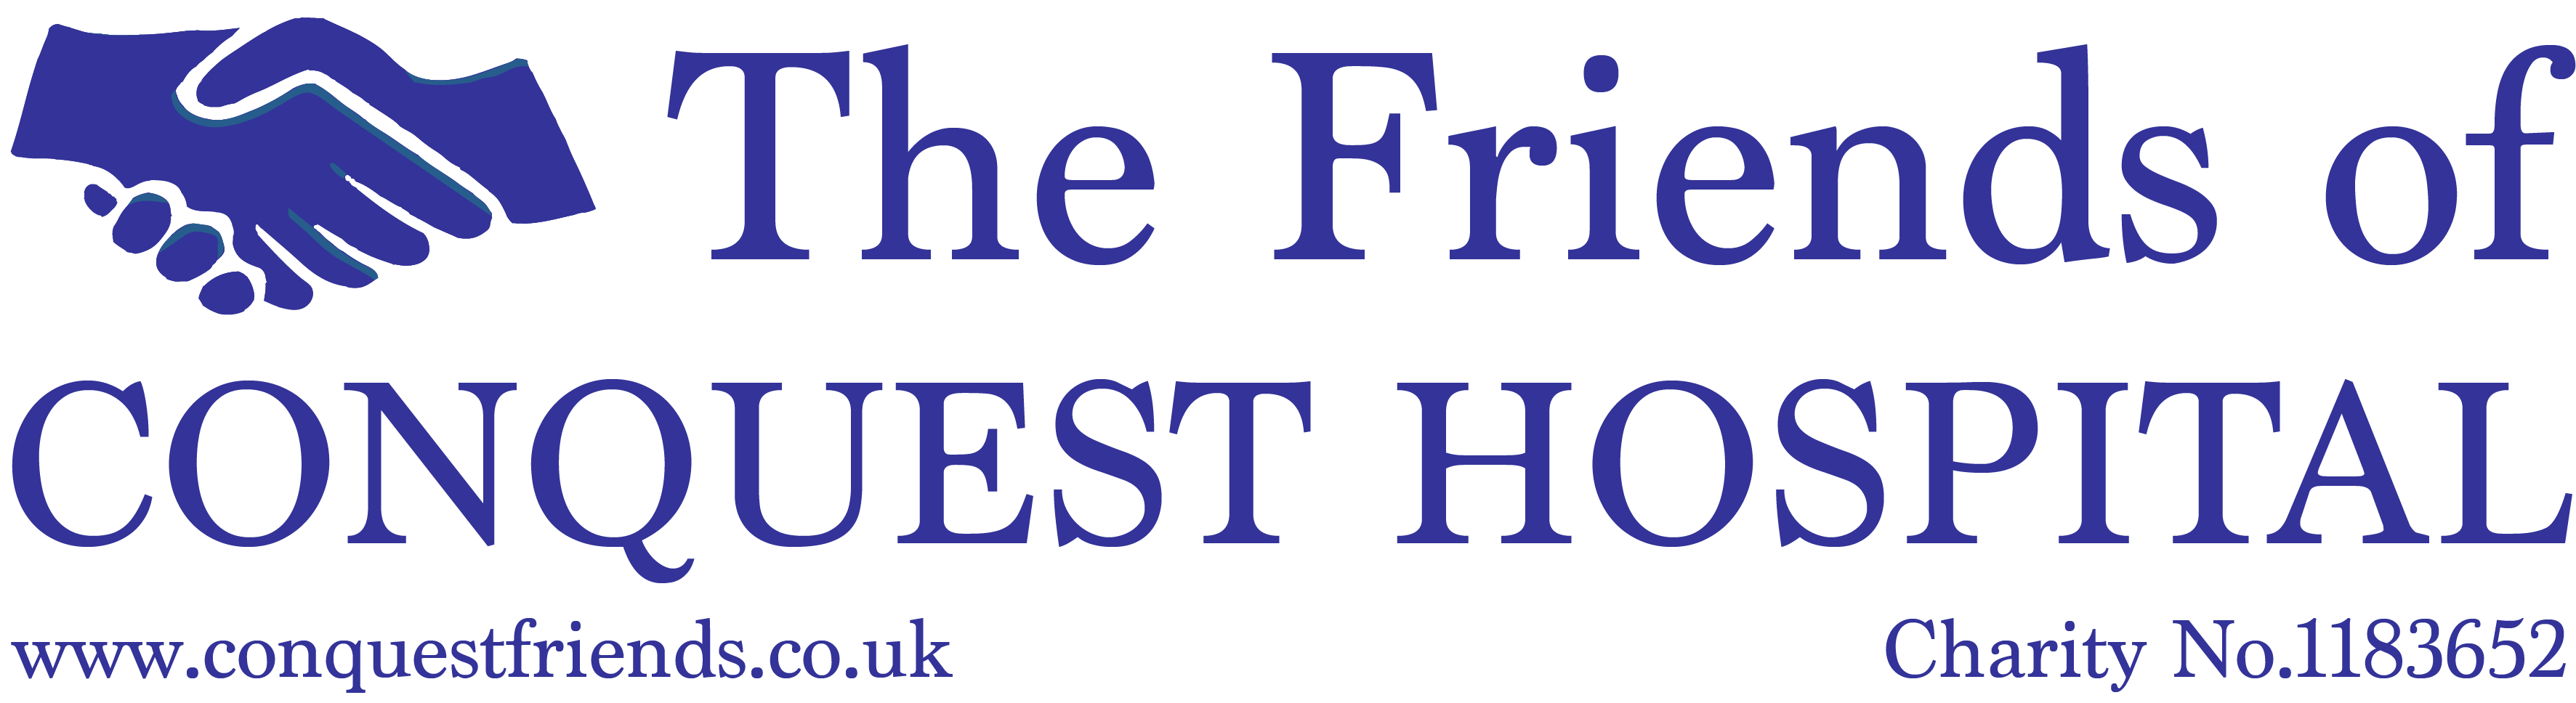 The Friends of Conquest Hospital logo